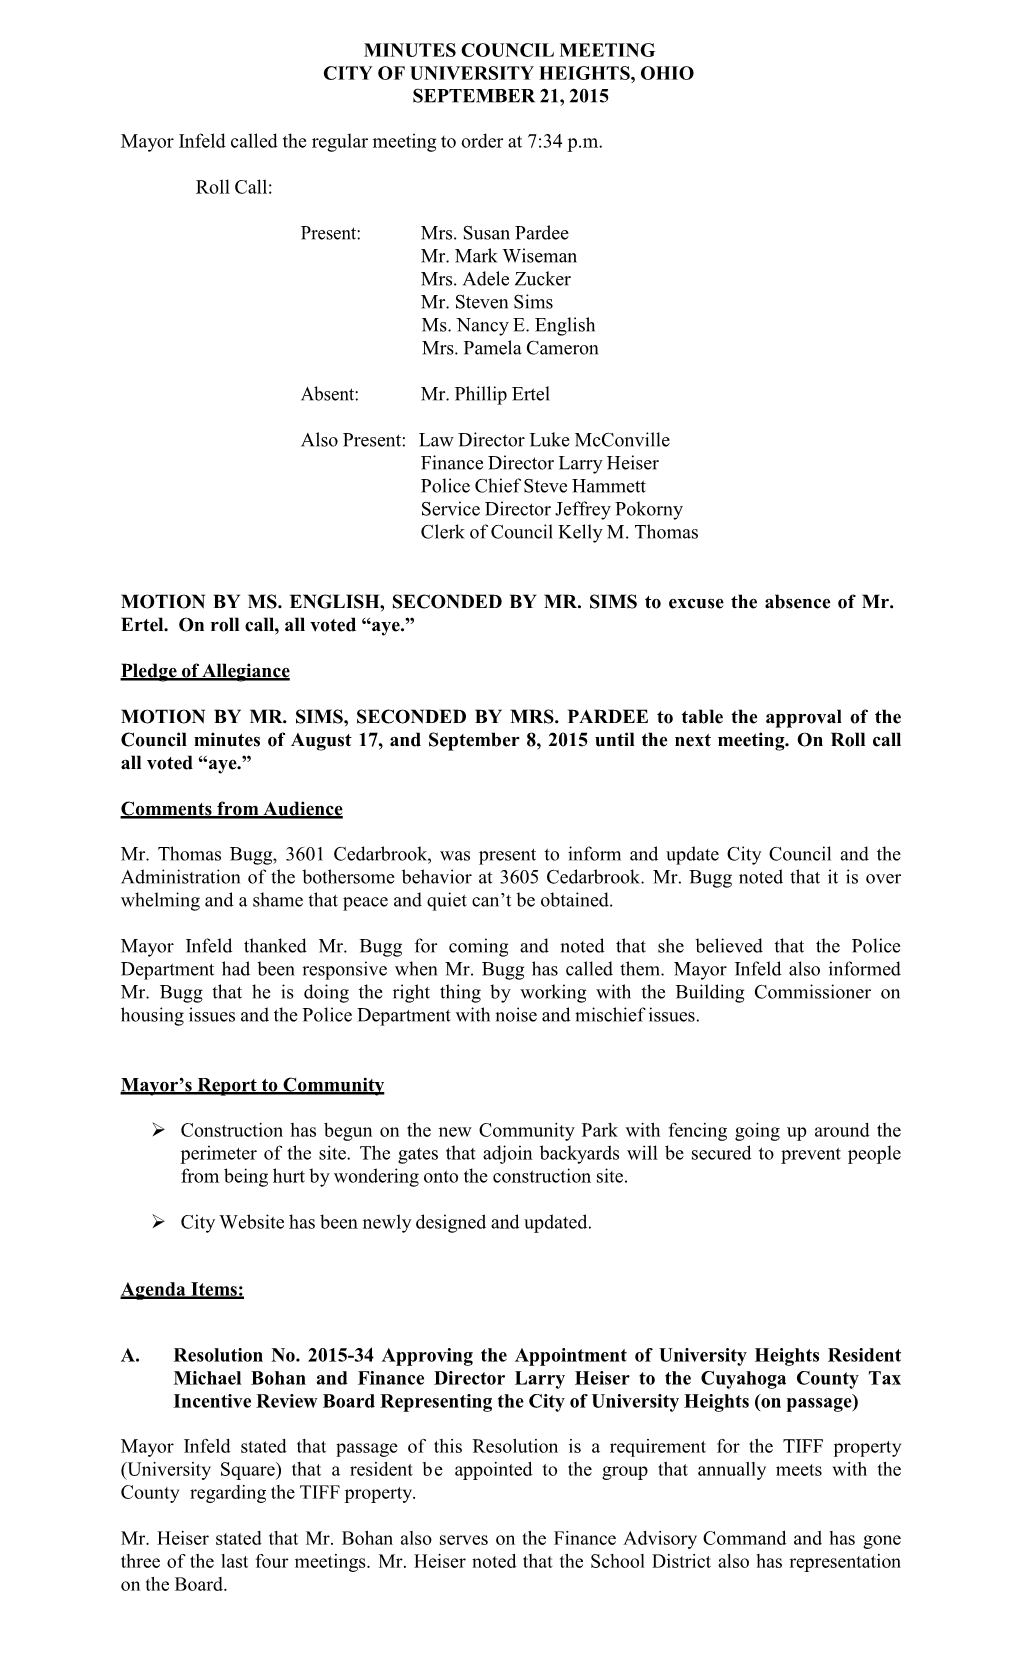 Minutes Council Meeting City of University Heights, Ohio September 21, 2015